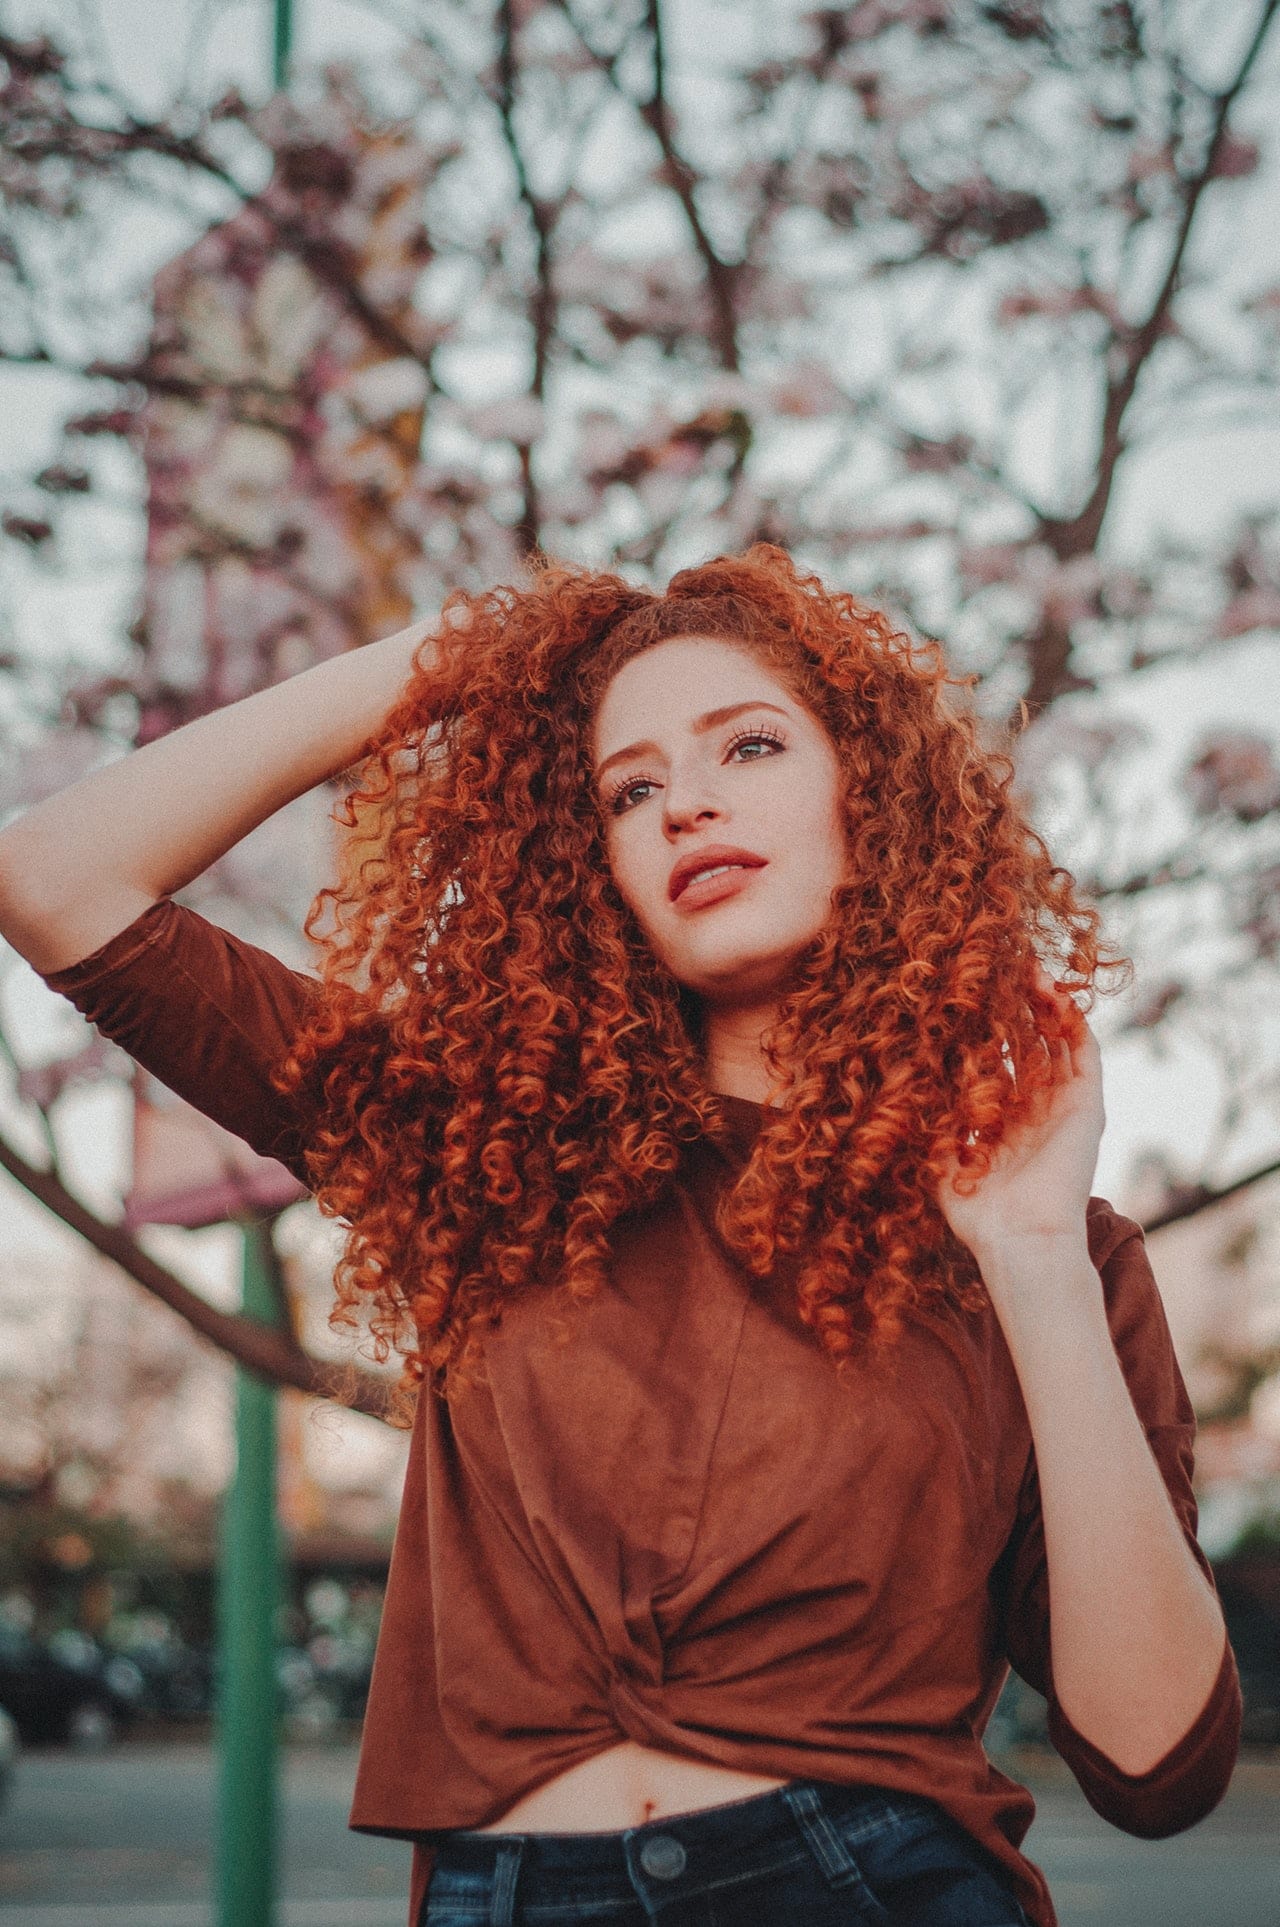 10 interesting facts about redheads